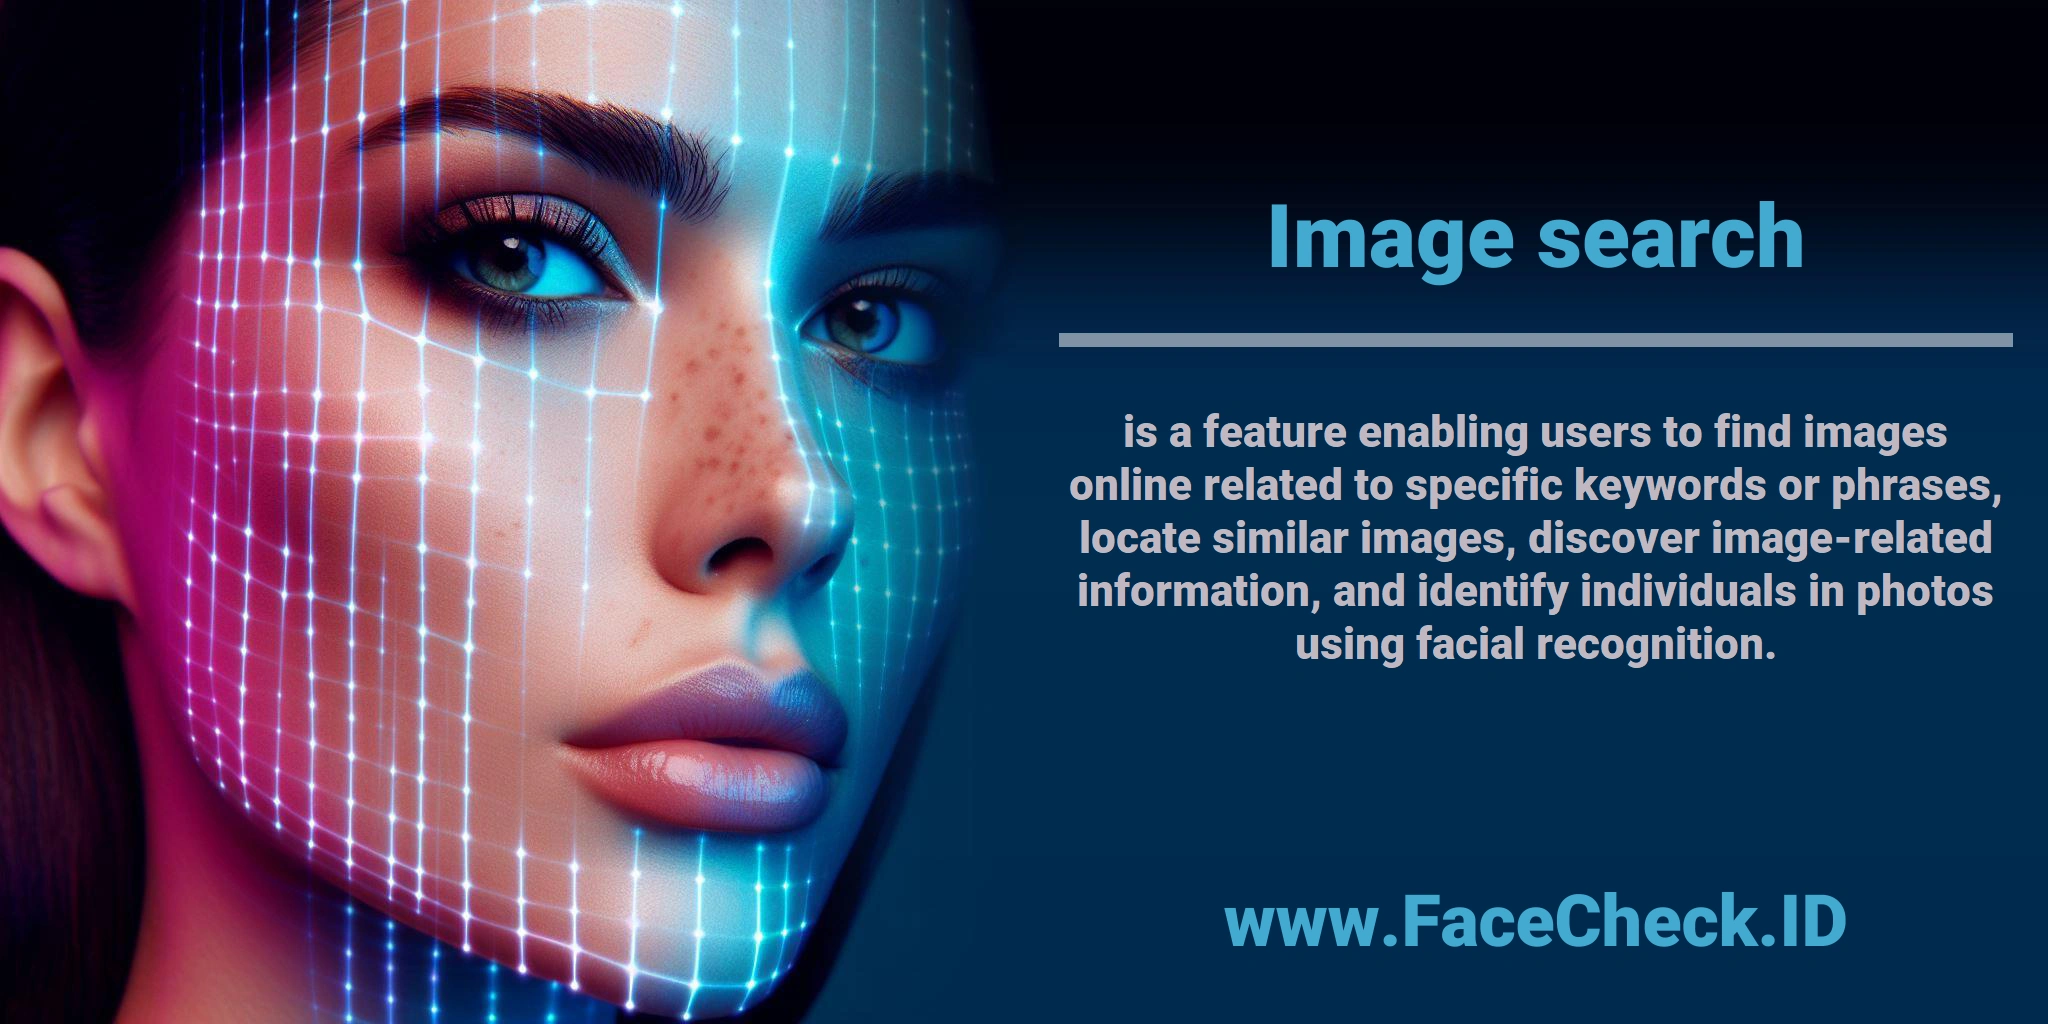 <b>Image search</b> is a feature enabling users to find images online related to specific keywords or phrases, locate similar images, discover image-related information, and identify individuals in photos using facial recognition.